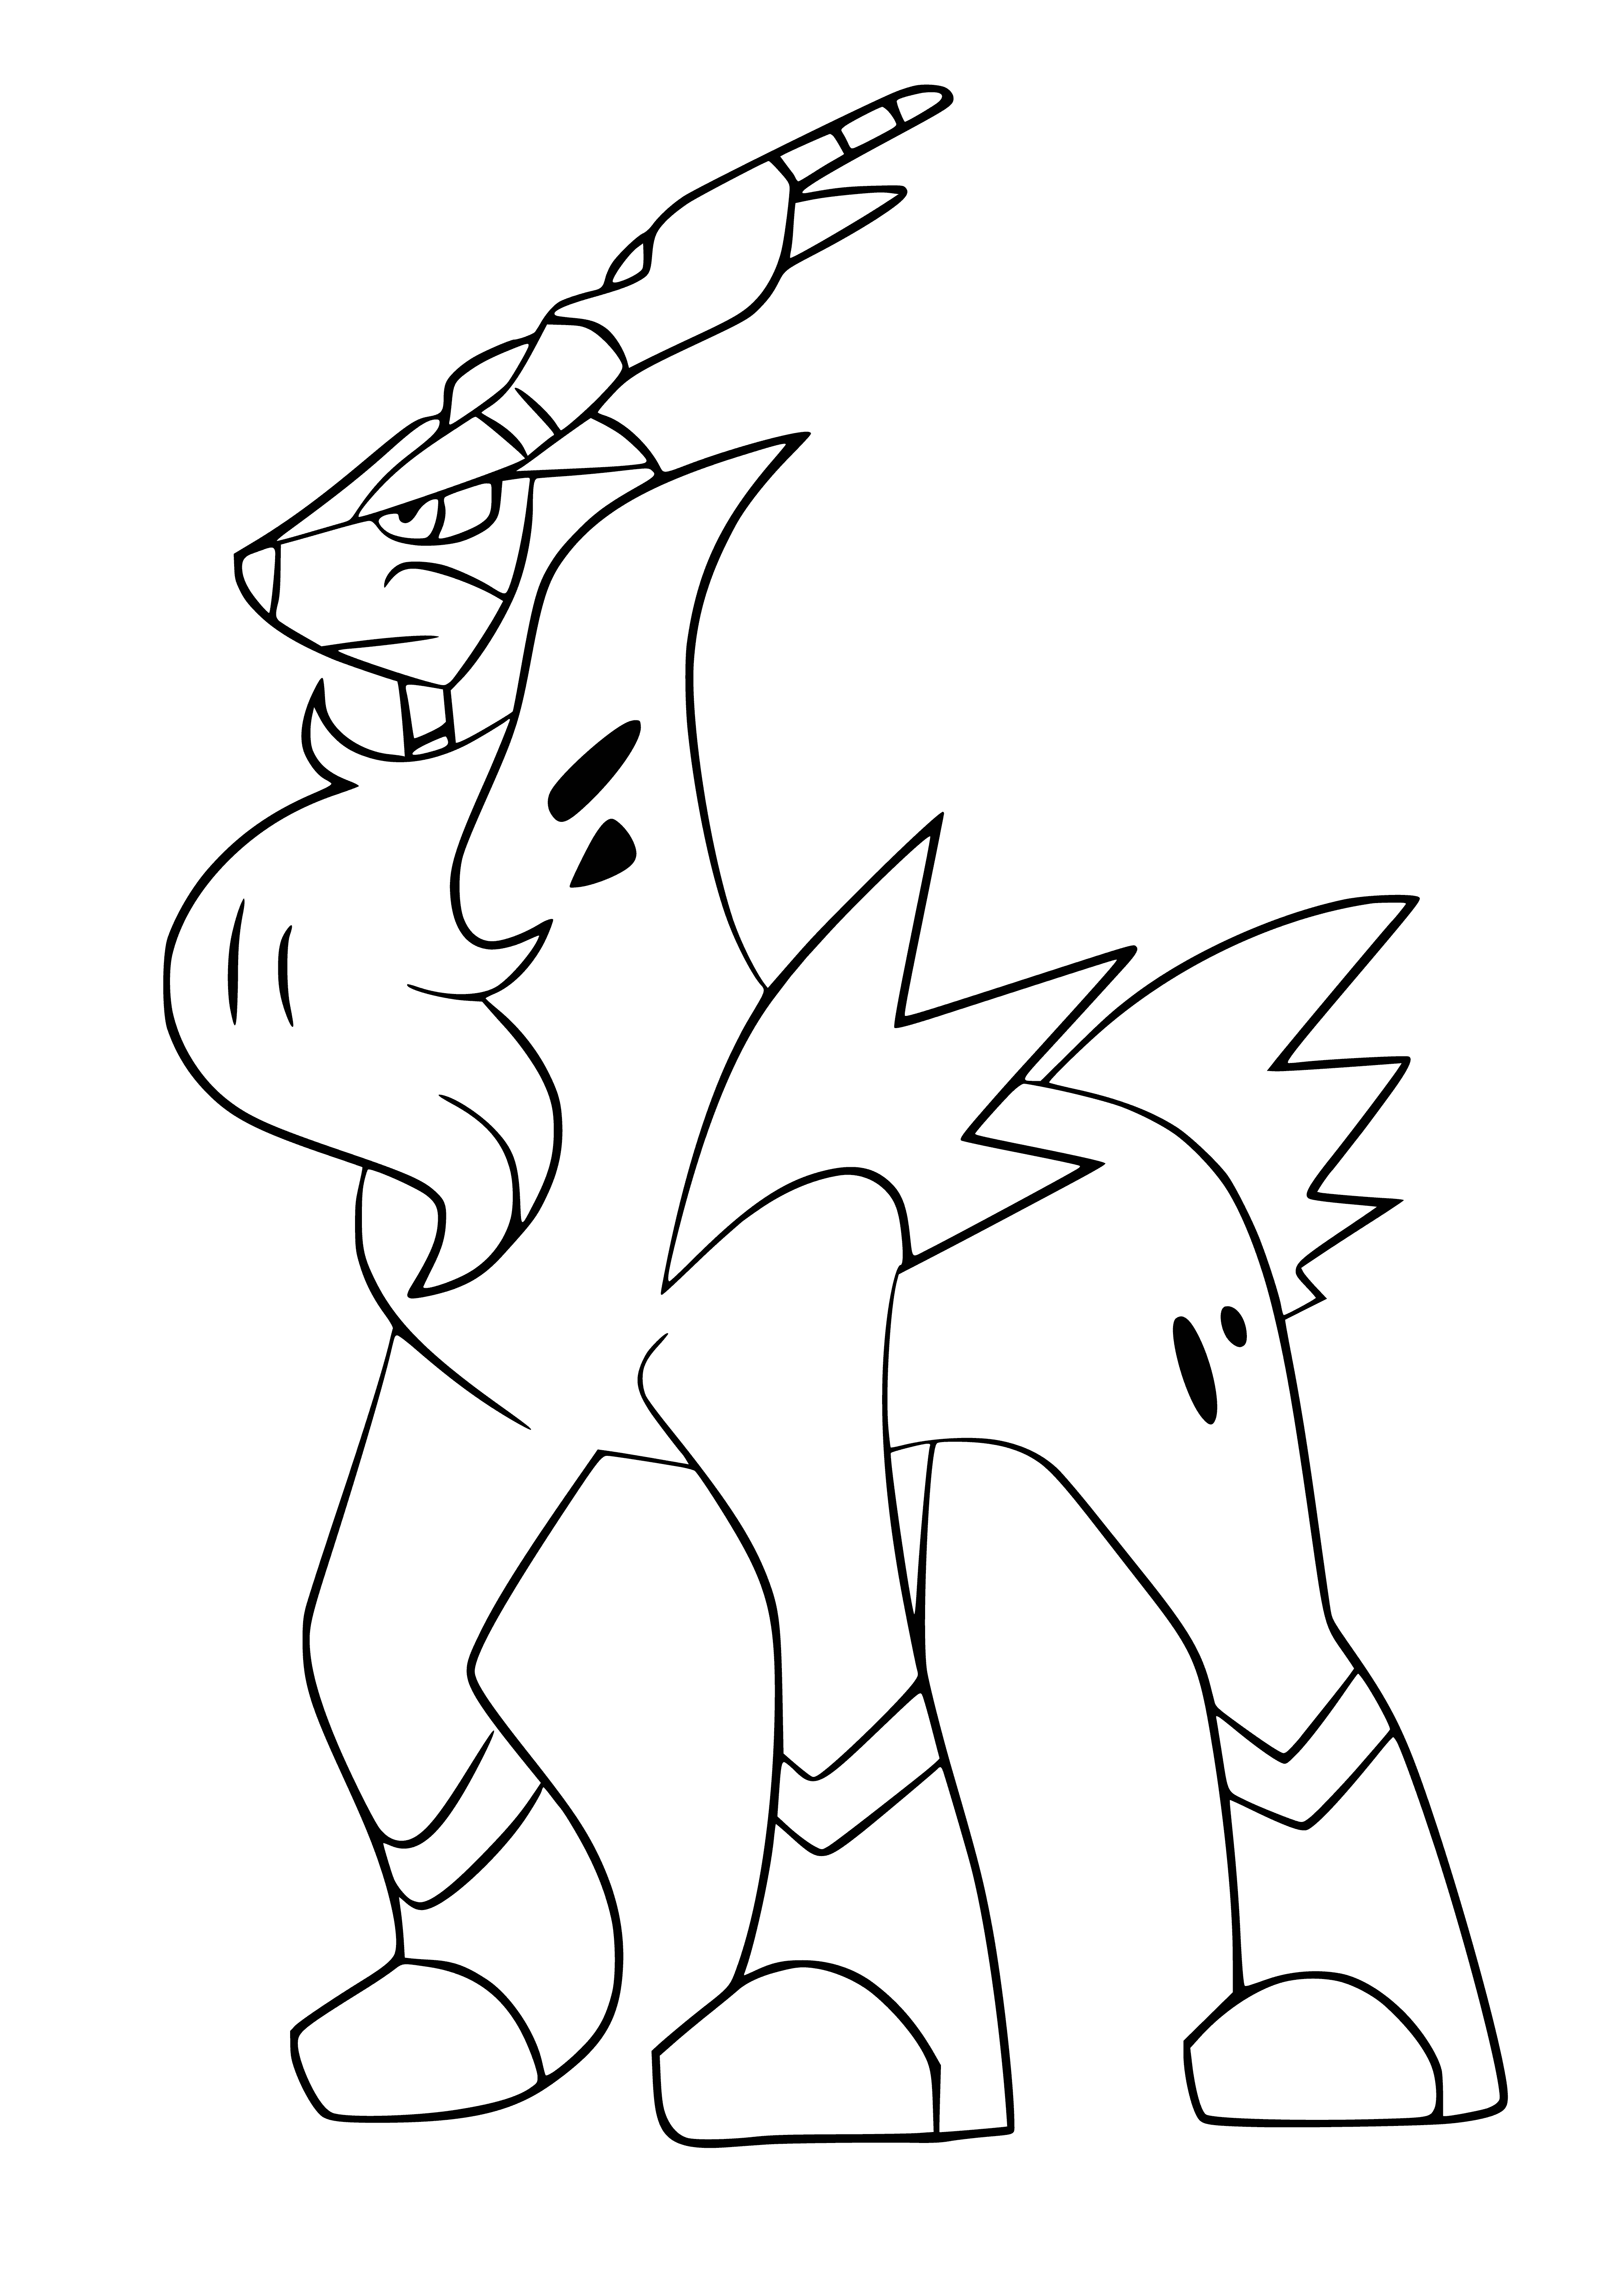 coloring page: Cobalion is a gentle yet fierce protector, said to always keep its promises.